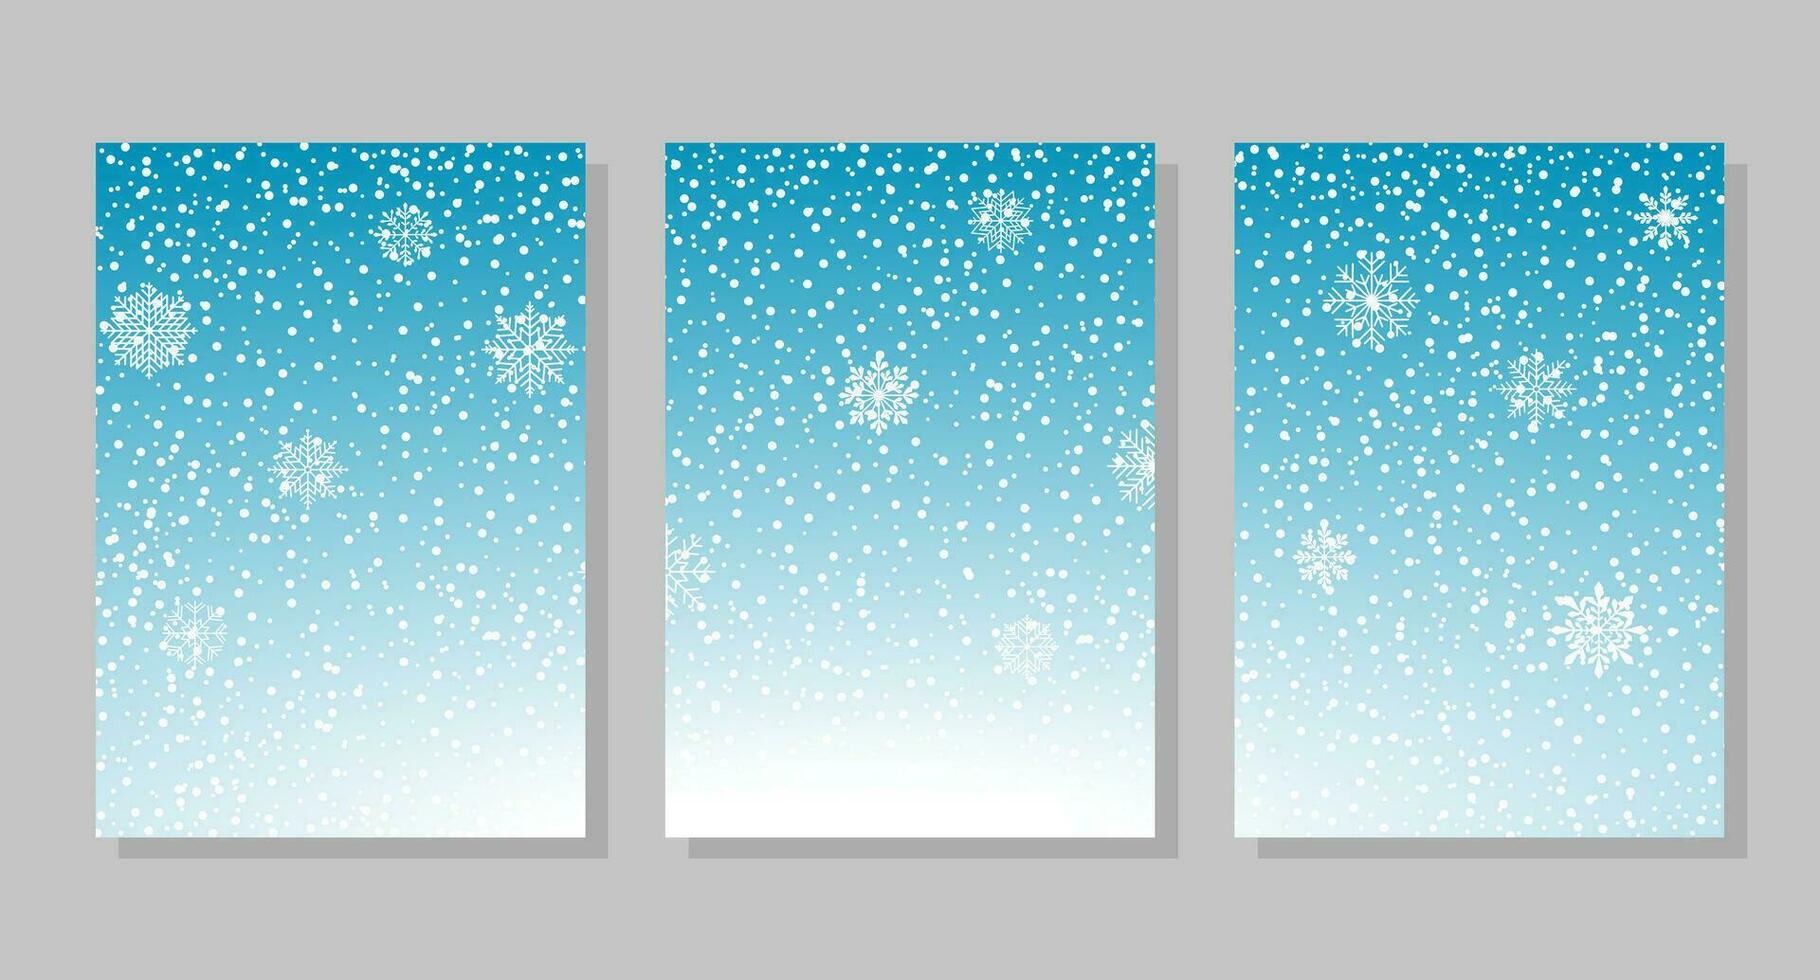 Set of winter sky background with snow and snowflakes, frames. Vector illustration. Social media banner template for stories, posts, blogs, cards, invitations.